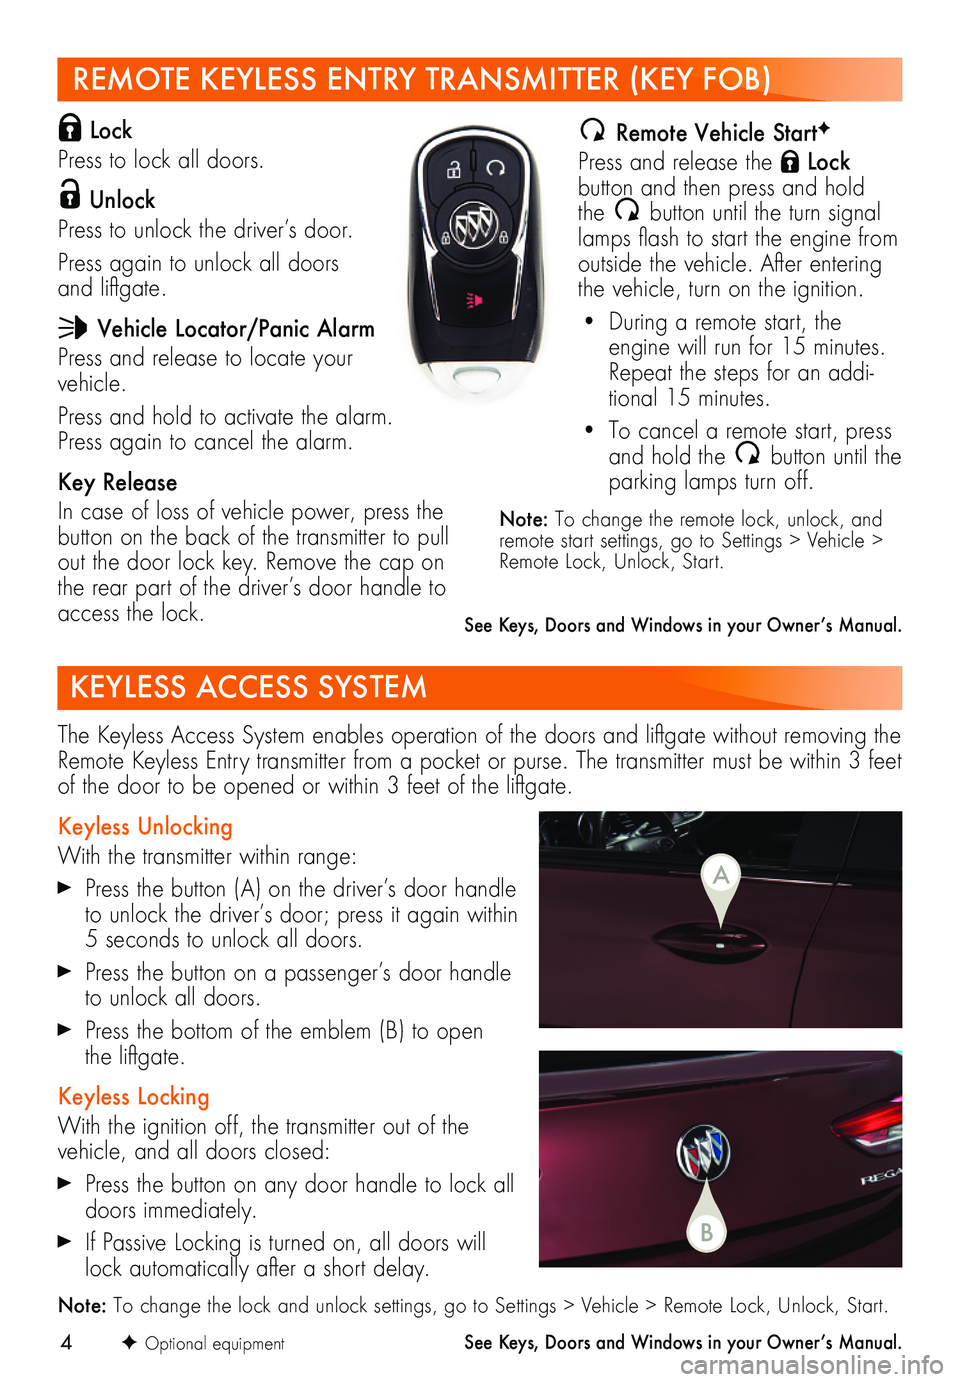 BUICK REGAL SPORTBACK 2019  Get To Know Guide 4
REMOTE KEYLESS ENTRY TRANSMITTER (KEY FOB) 
 Lock  
Press to lock all doors. 
 Unlock 
Press to unlock the driver’s door. 
Press again to unlock all doors  and liftgate.
 Vehicle Locator/Panic Ala